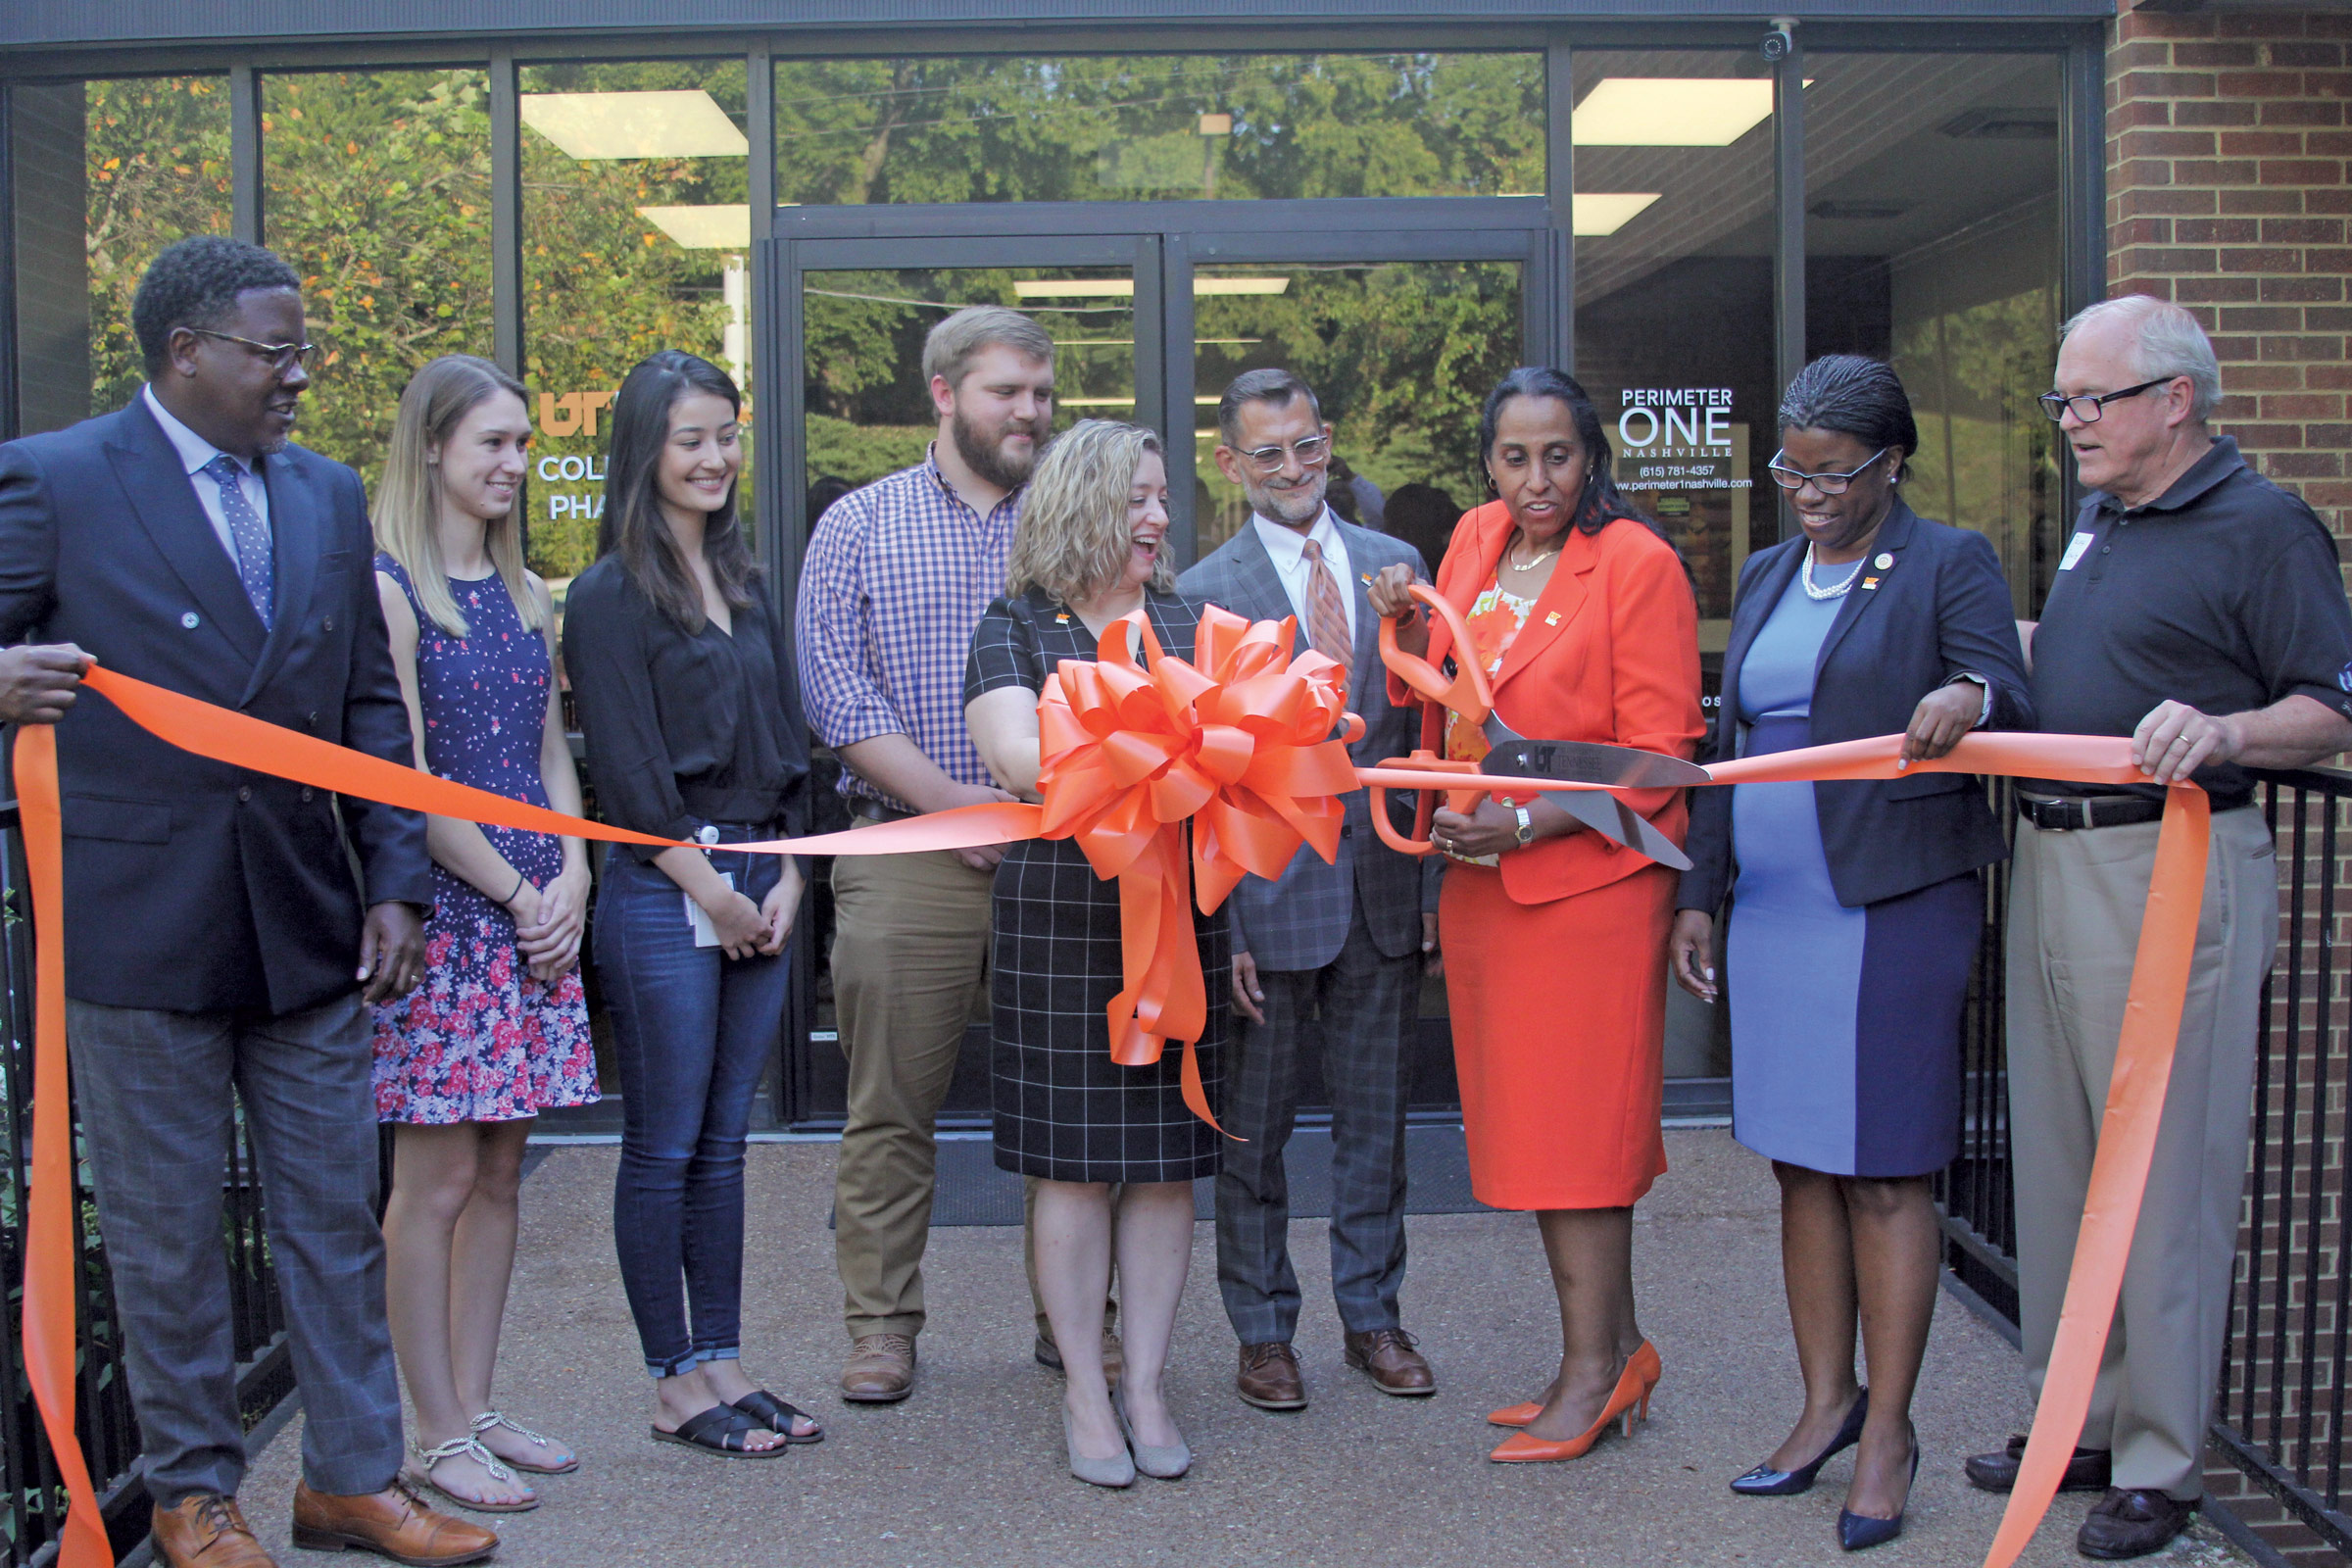 College of Pharmacy leaders and students celebrate the opening of a larger space to learn.